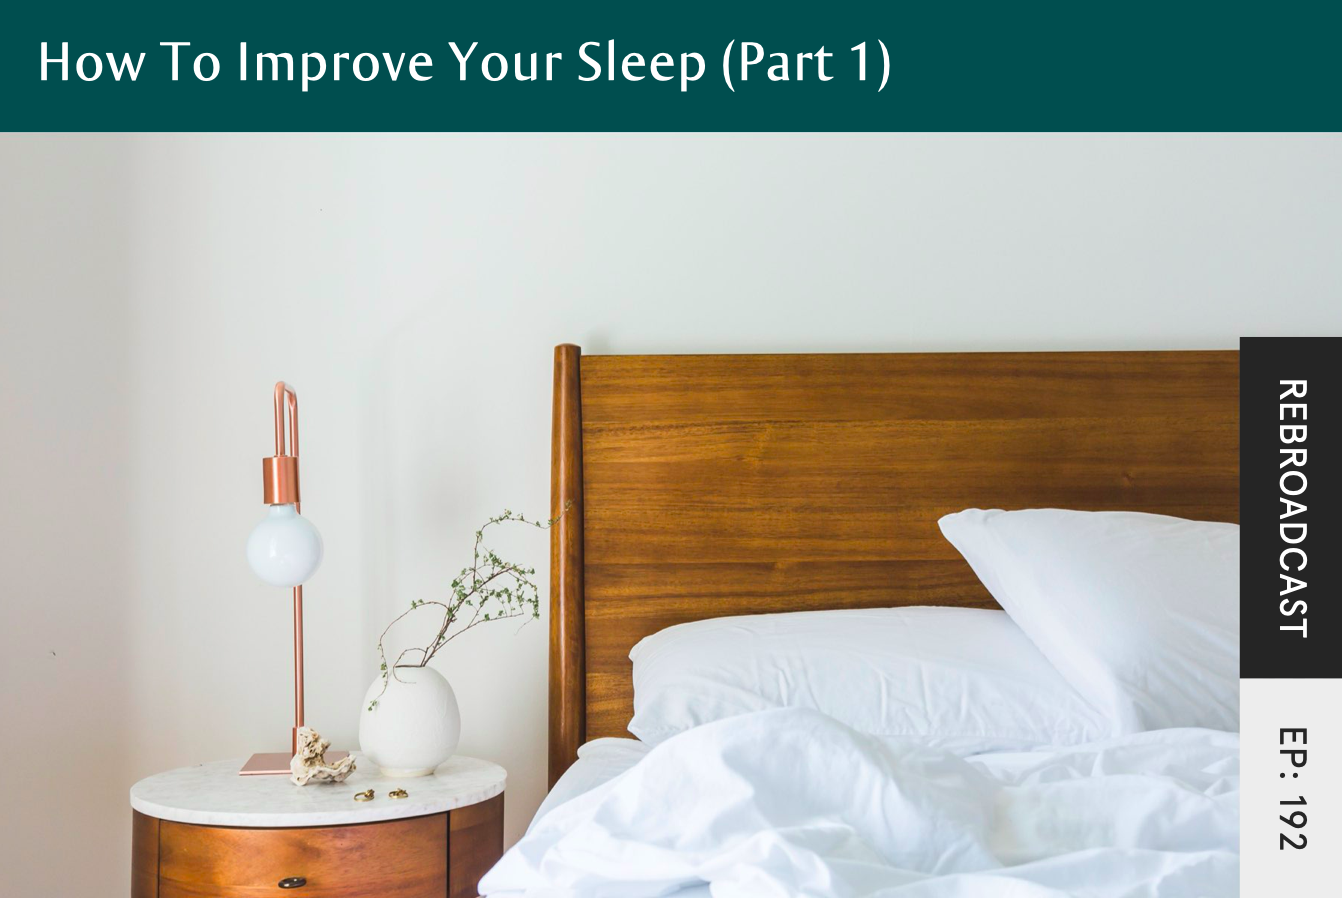 Rebroadcast: How To Improve Your Sleep, Pt. 1 (2nd Edition) - Seven Health: Eating Disorder Recovery and Anti Diet Nutritionist